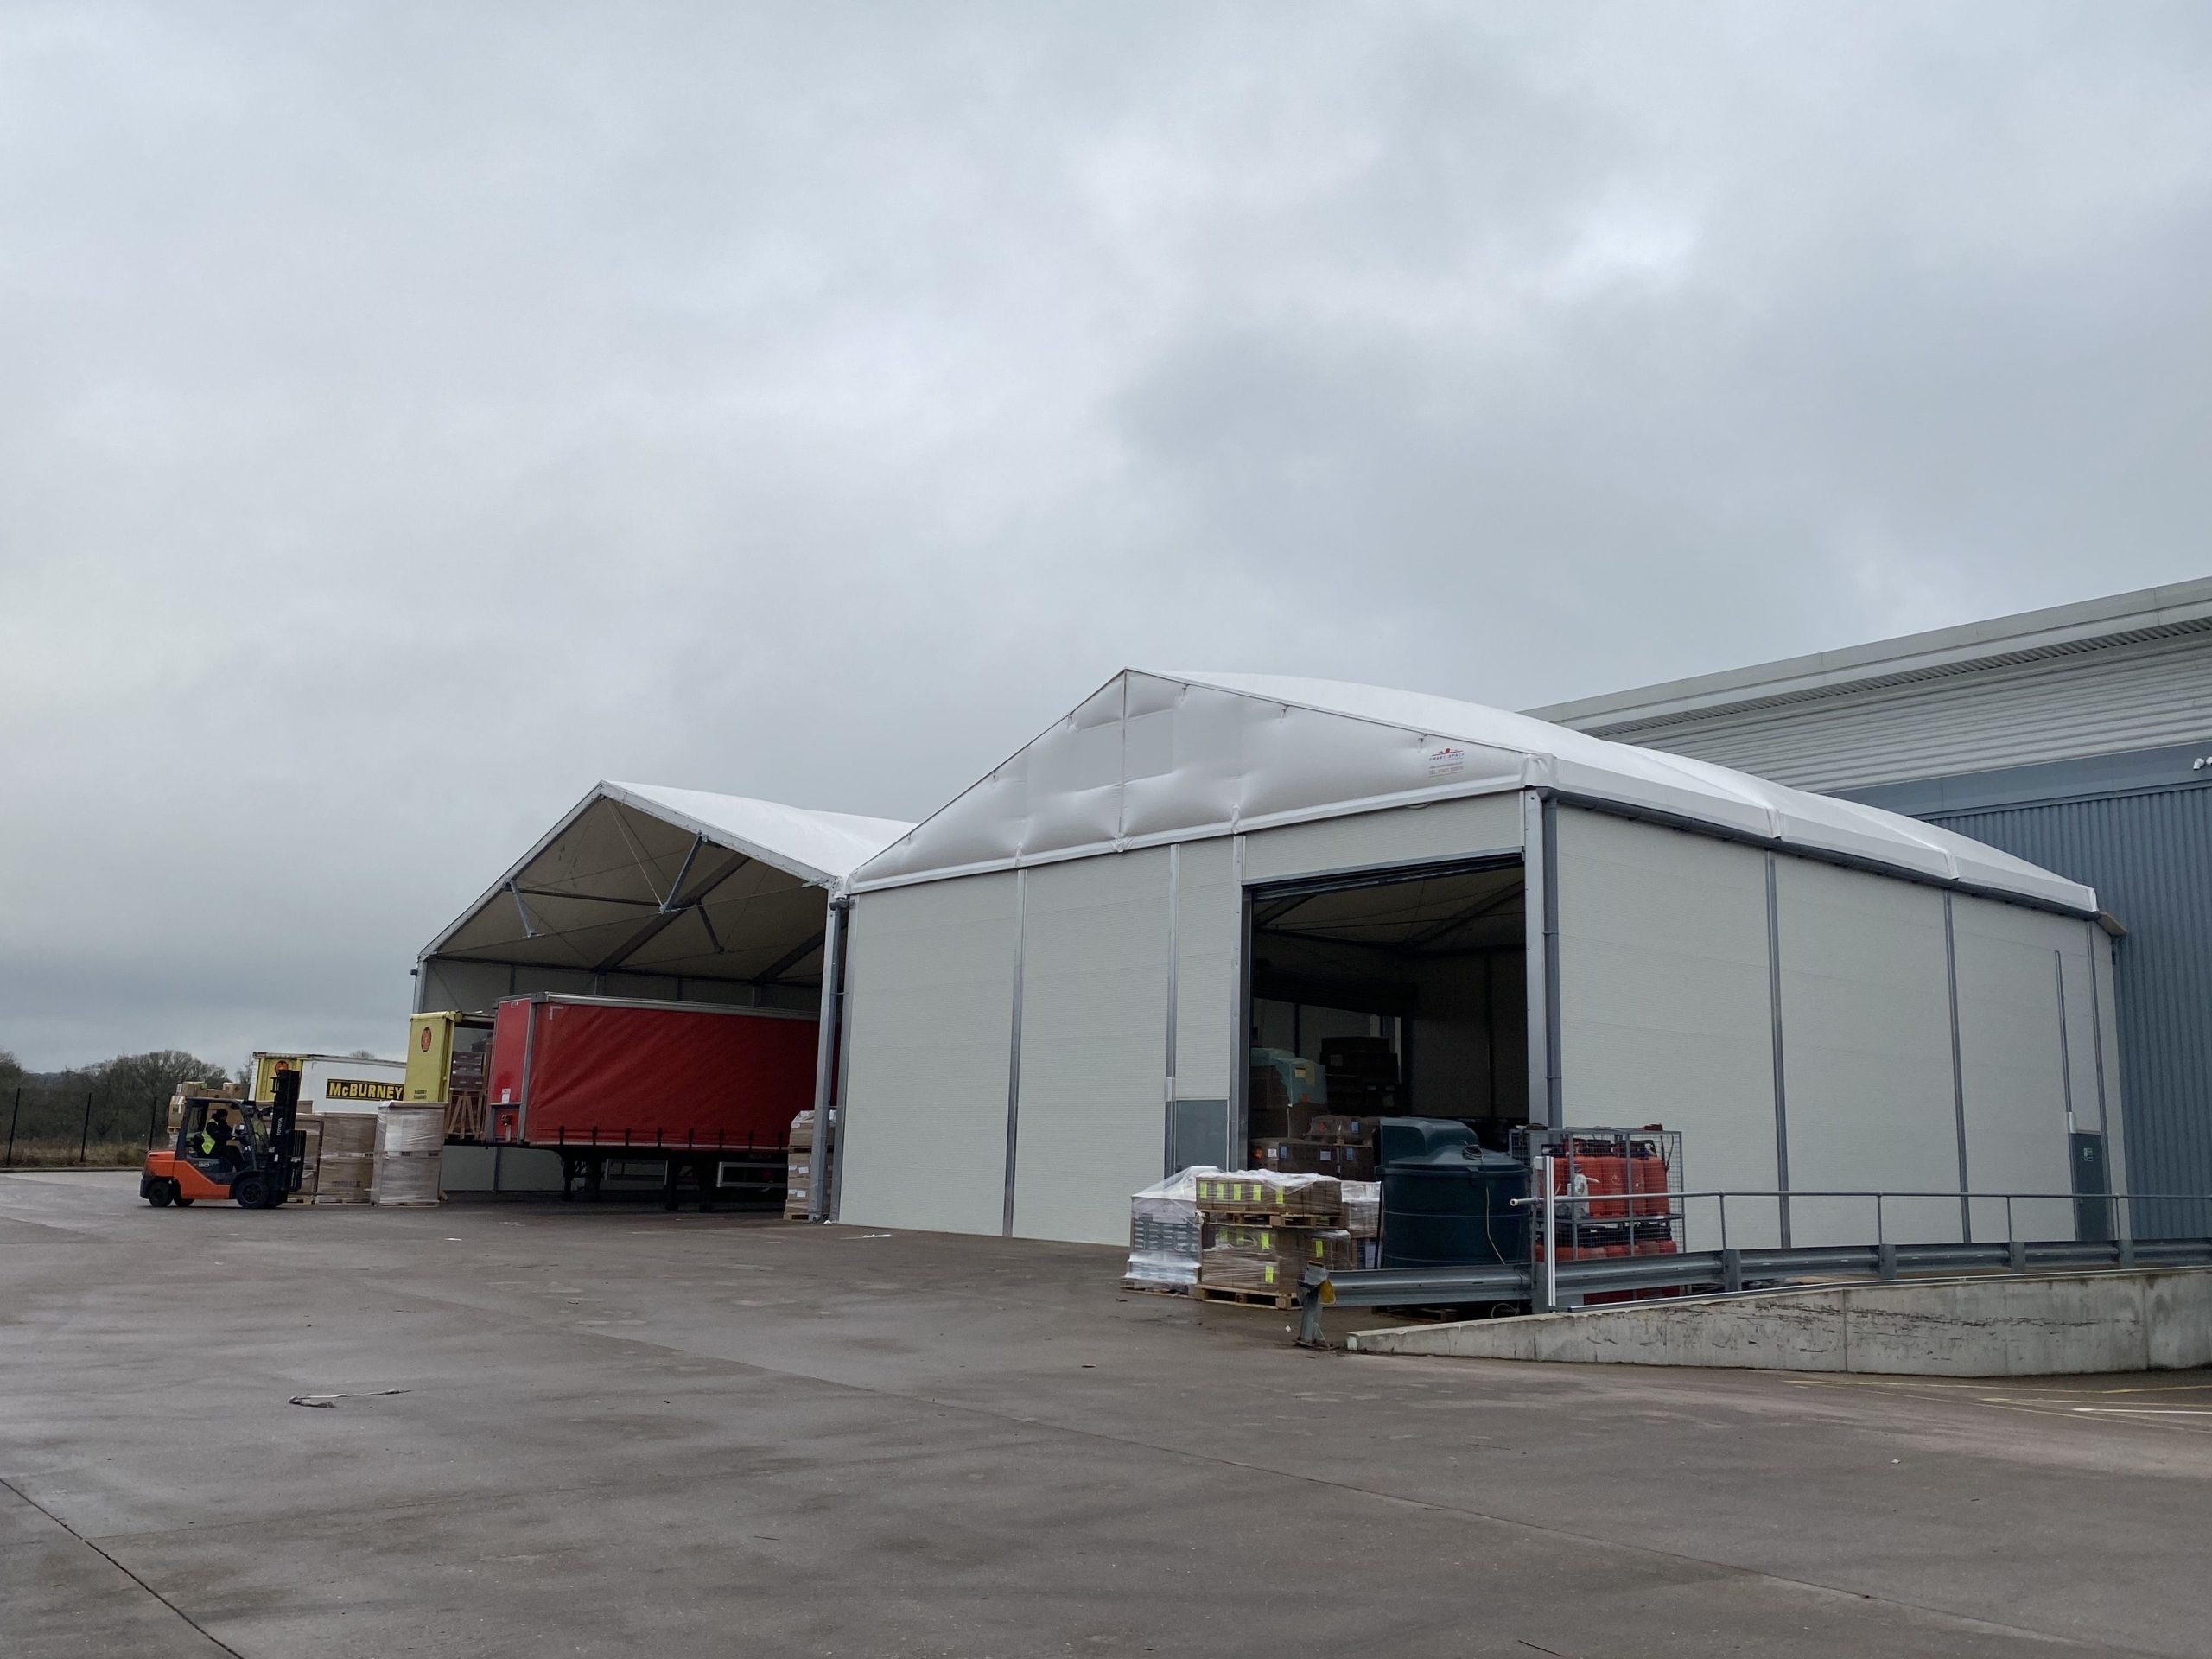 Loading bay and canopy solutions – Smart-Space has you covered